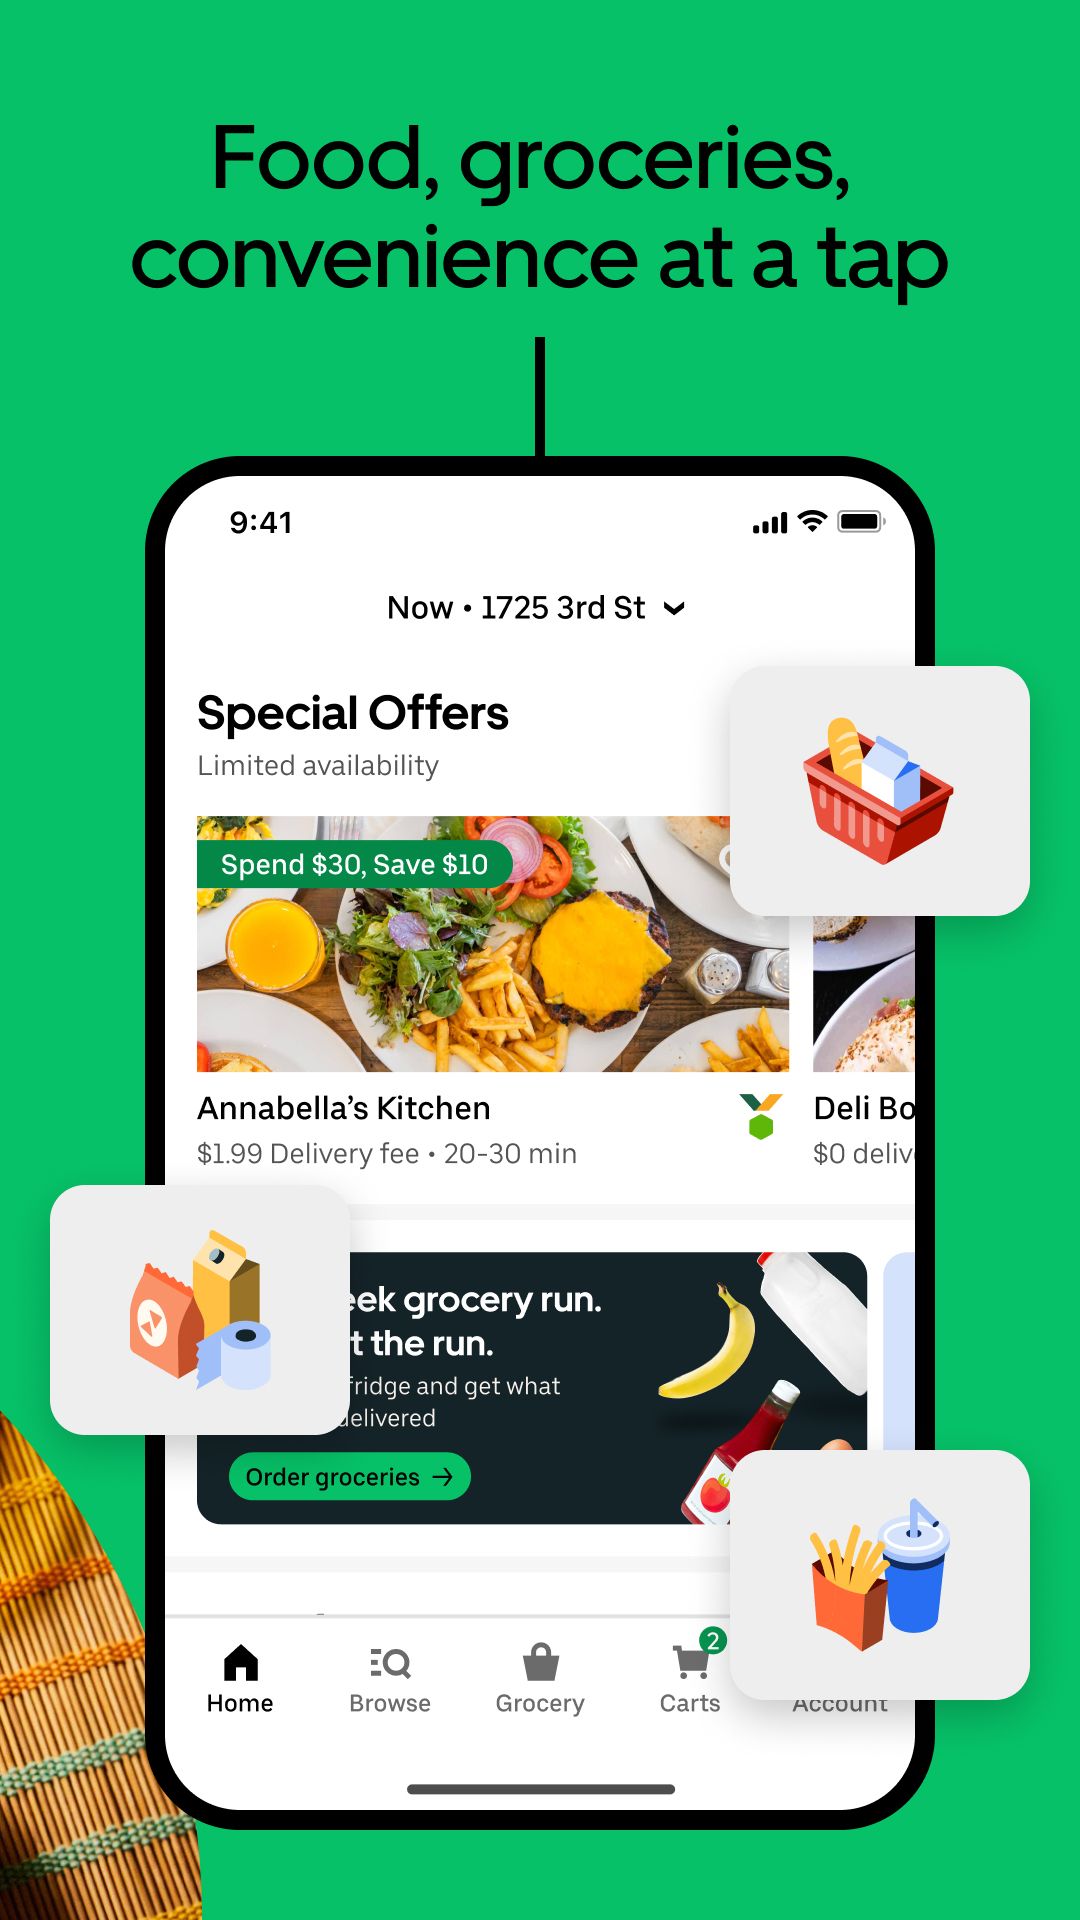 Food, groceries, convenience at at tap when you order from Uber Eats